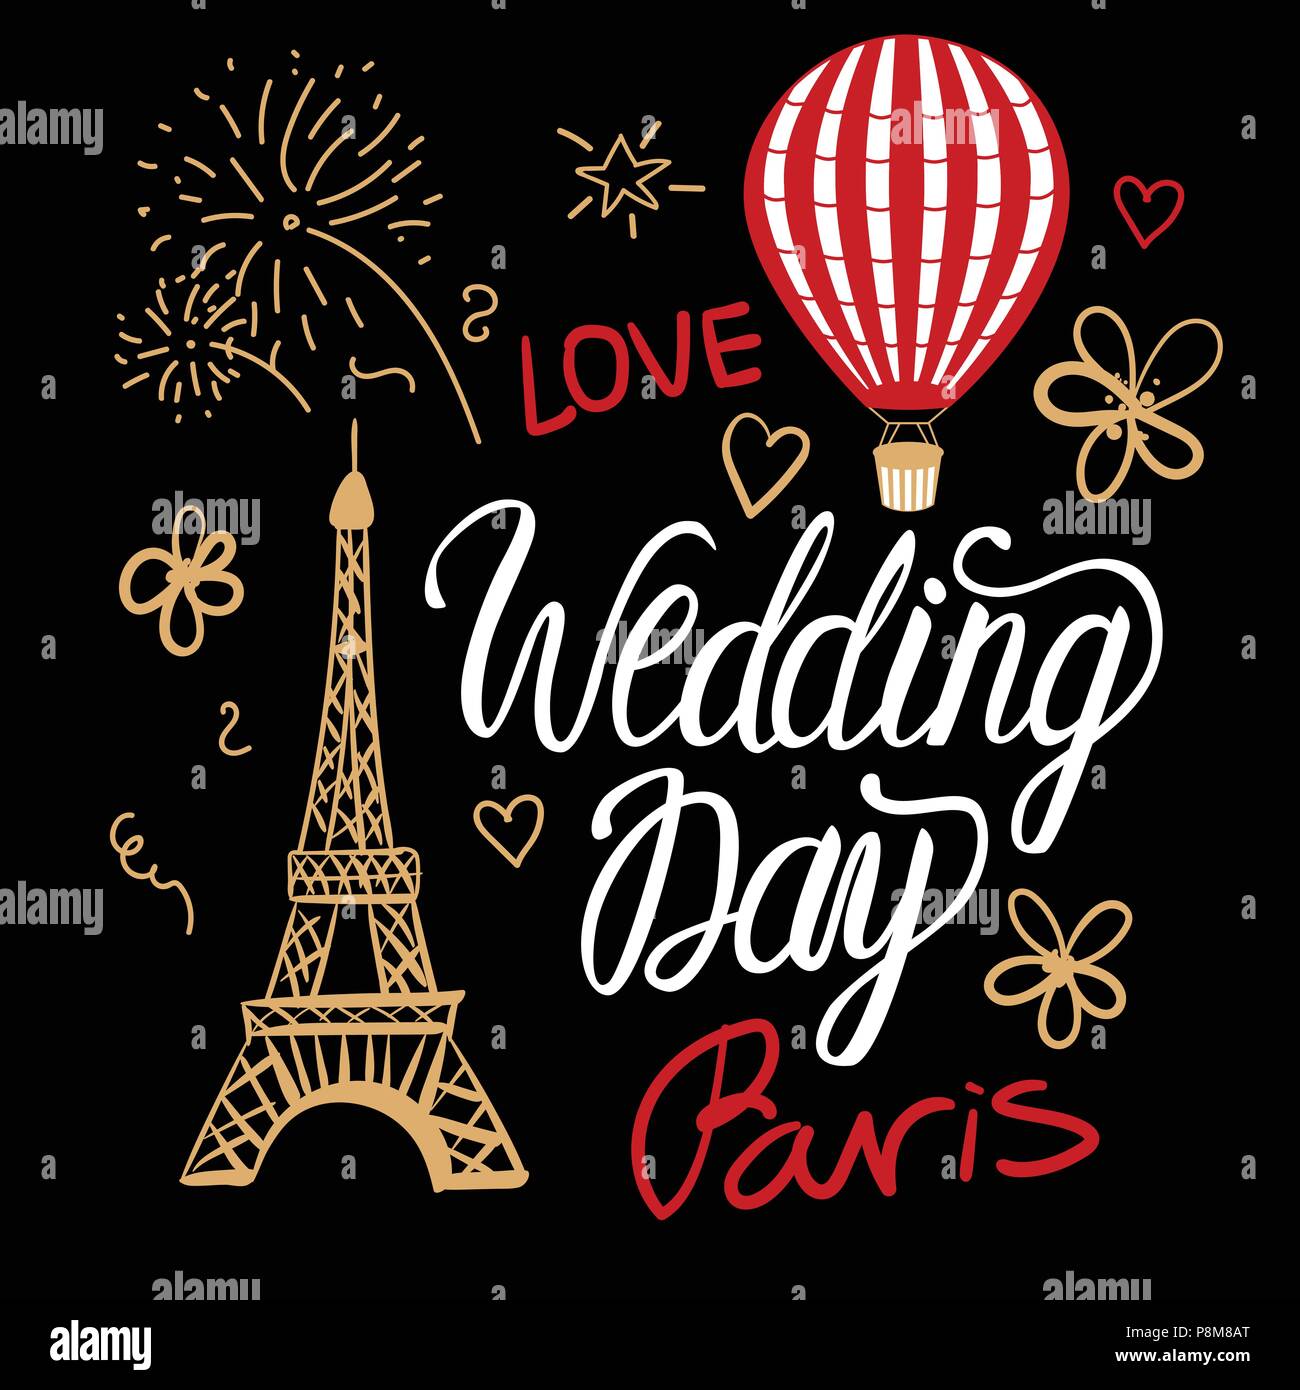 Wedding Day in a vintage Parisian style fashion. Vector illustrations elements Eiffel Tower, air balloon and lettering. Stock Vector